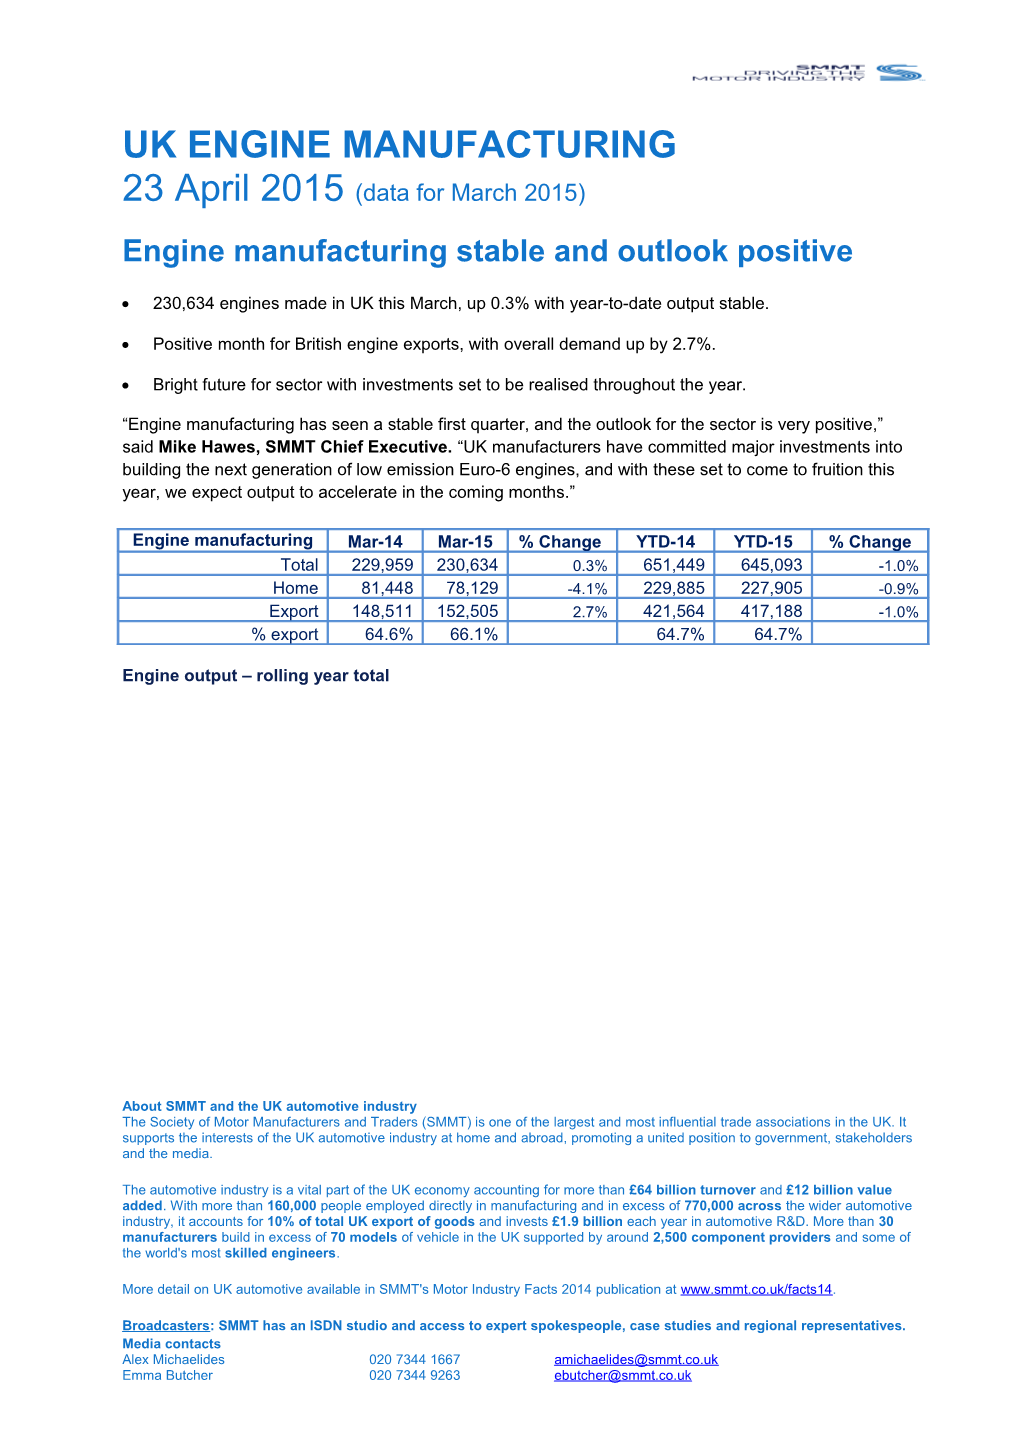 Engine Manufacturing Stable and Outlook Positive